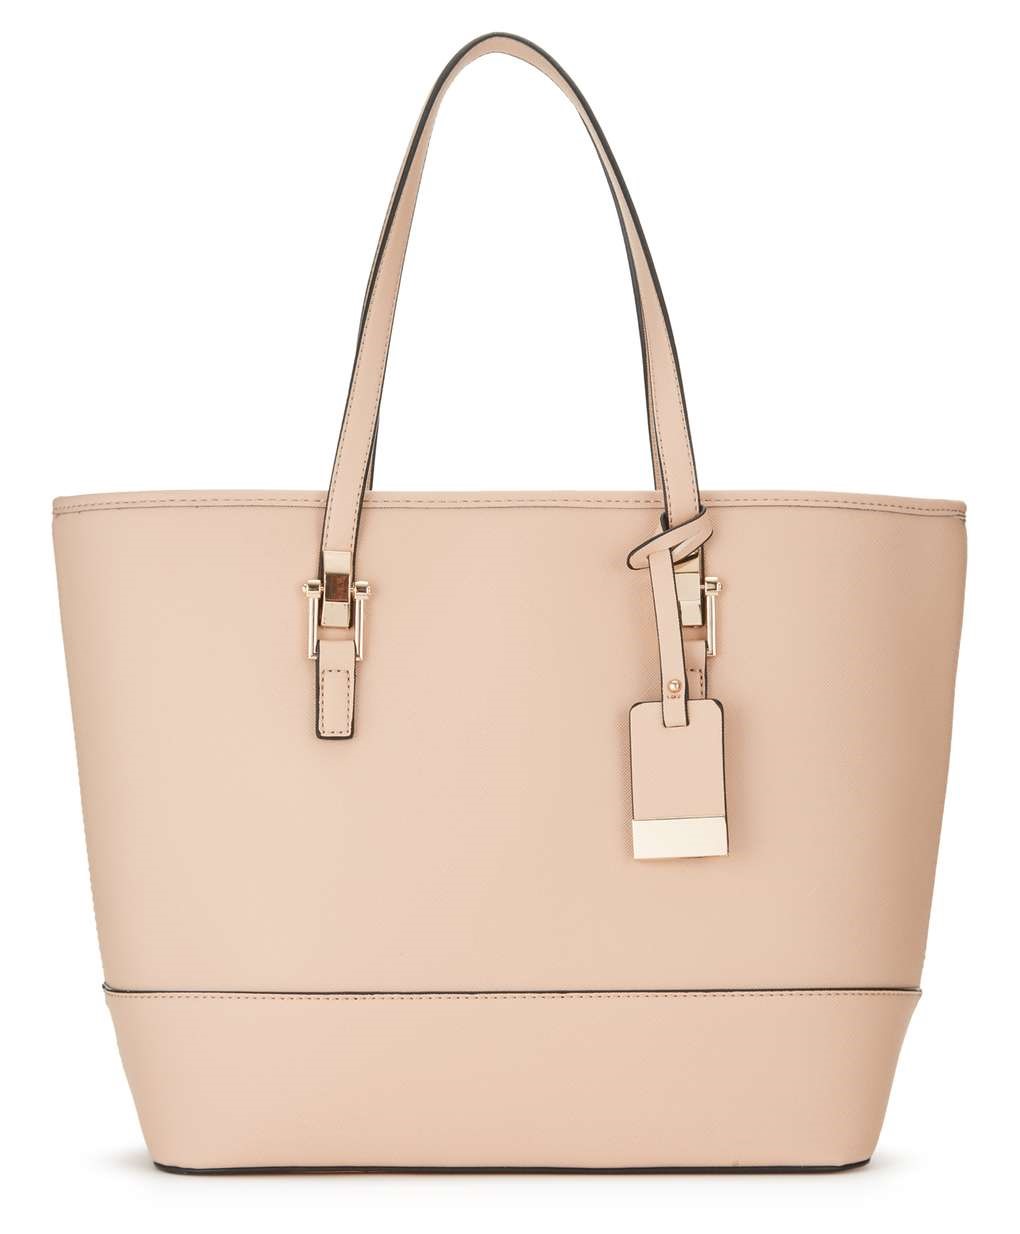 Top 10 high street handbags to buy now – The Upcoming